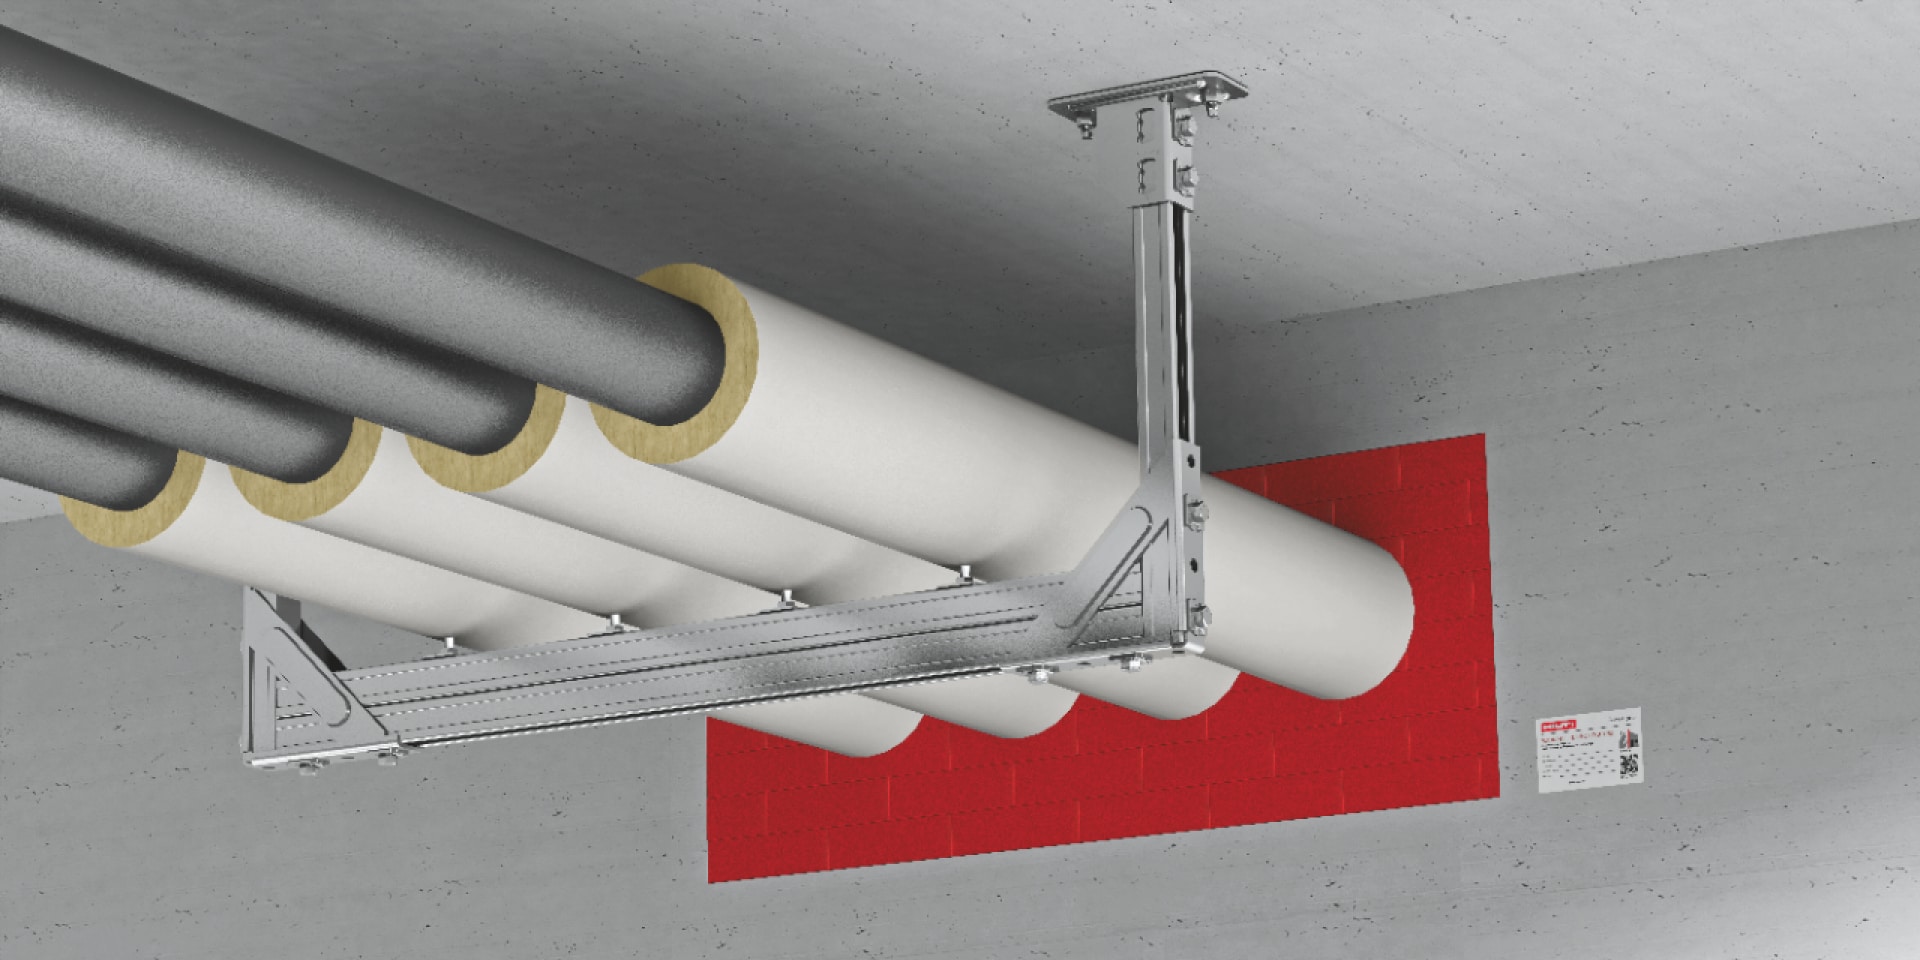 Mechanical, electrical and plumbing systems installed in the same strut trapeze structure, thanks to BIM tech integration in construction